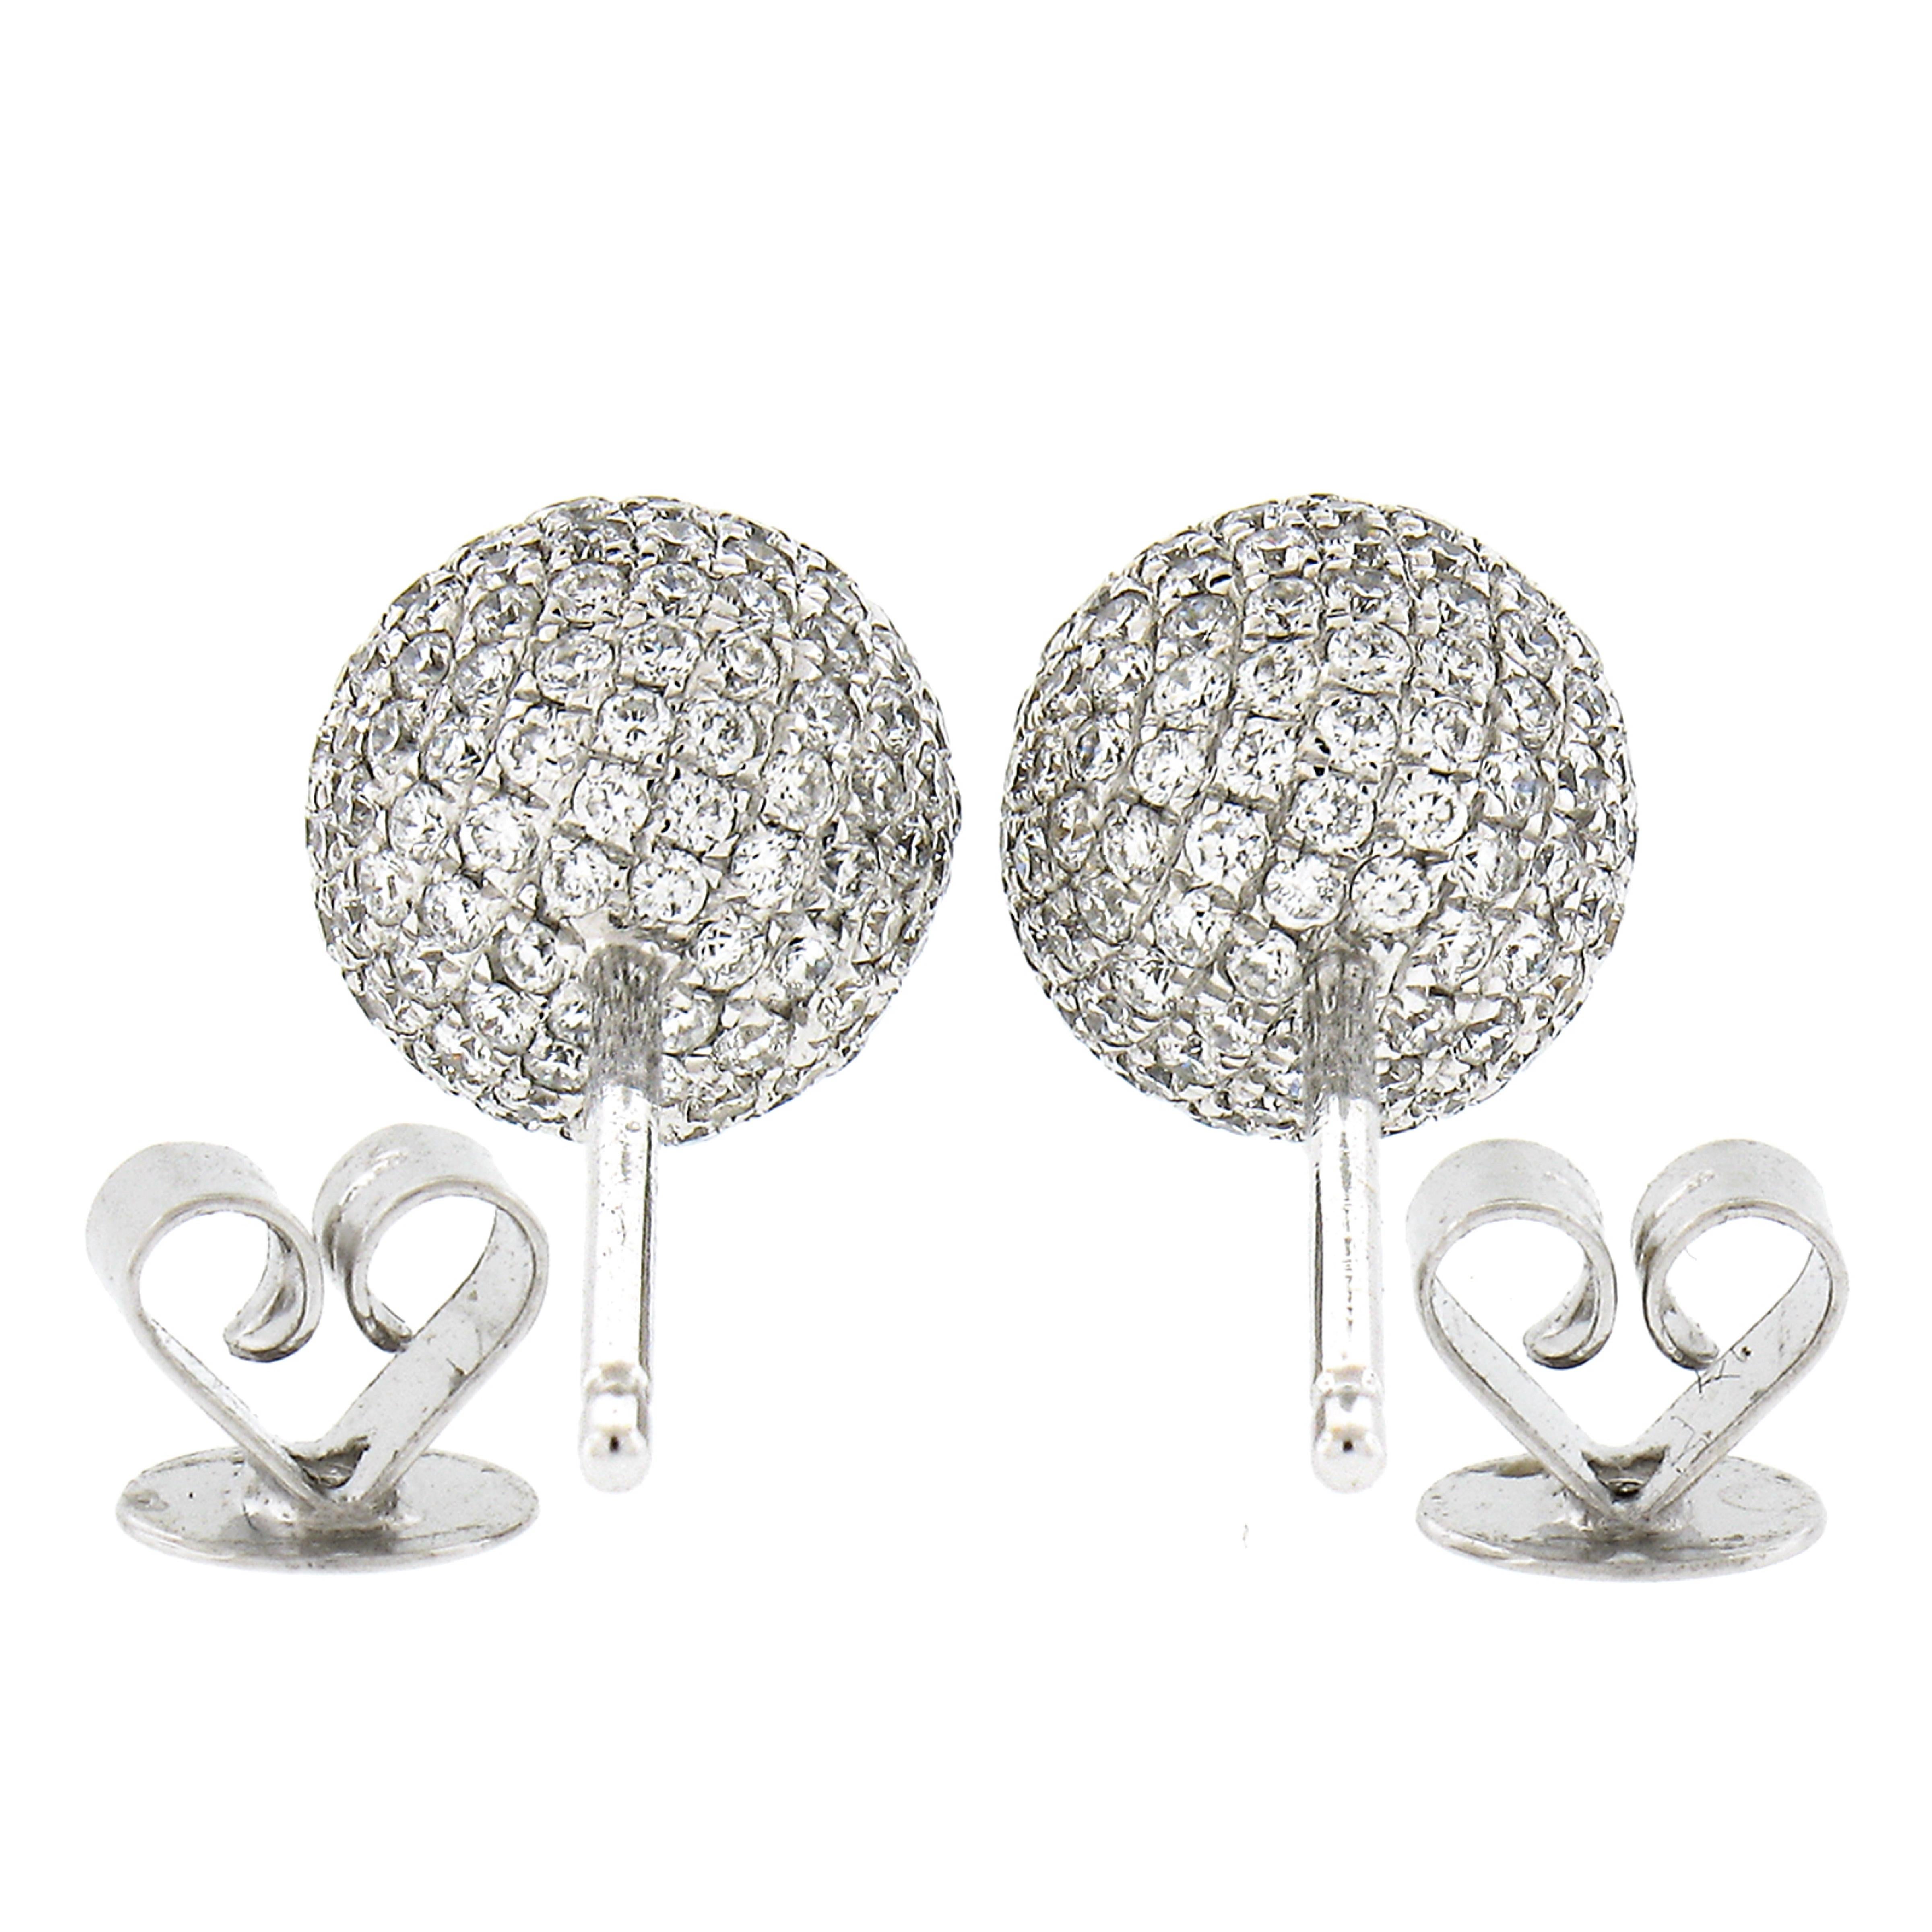 --Stone(s):--
Numerous Natural Genuine Diamonds - Round Brilliant Cut - Micro Pave Set - G-I Color - SI1-I1 Clarity - 0.96ctw (exact)

Material: 18K Solid White Gold
Weight: 2.52 Grams
Backing: Posts w/ Butterfly Closures (pierced ears